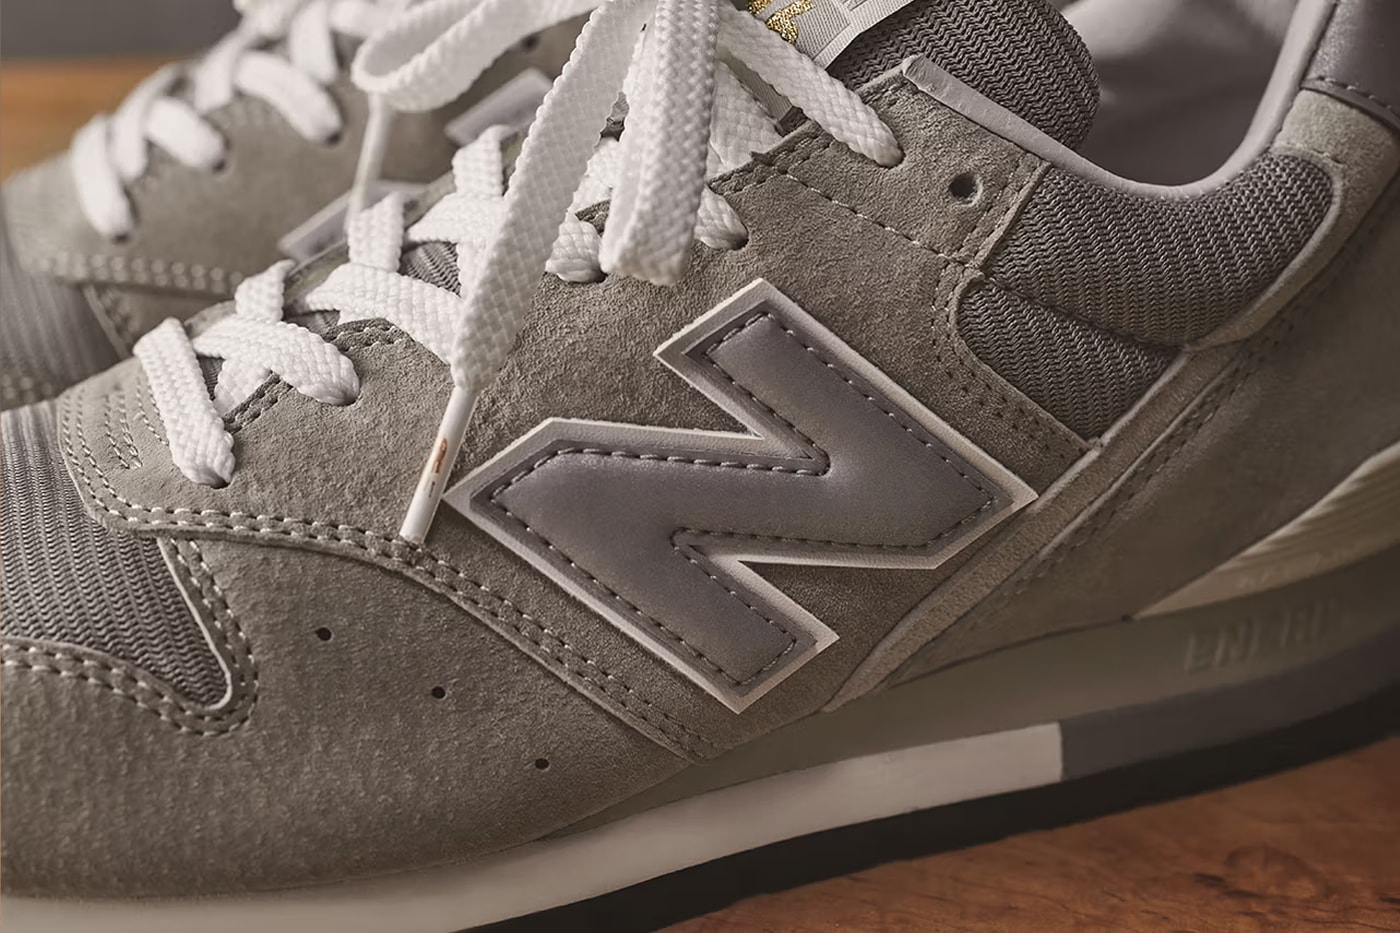 New Balance M996 Made in Japan Grey Colorway | Hypebeast